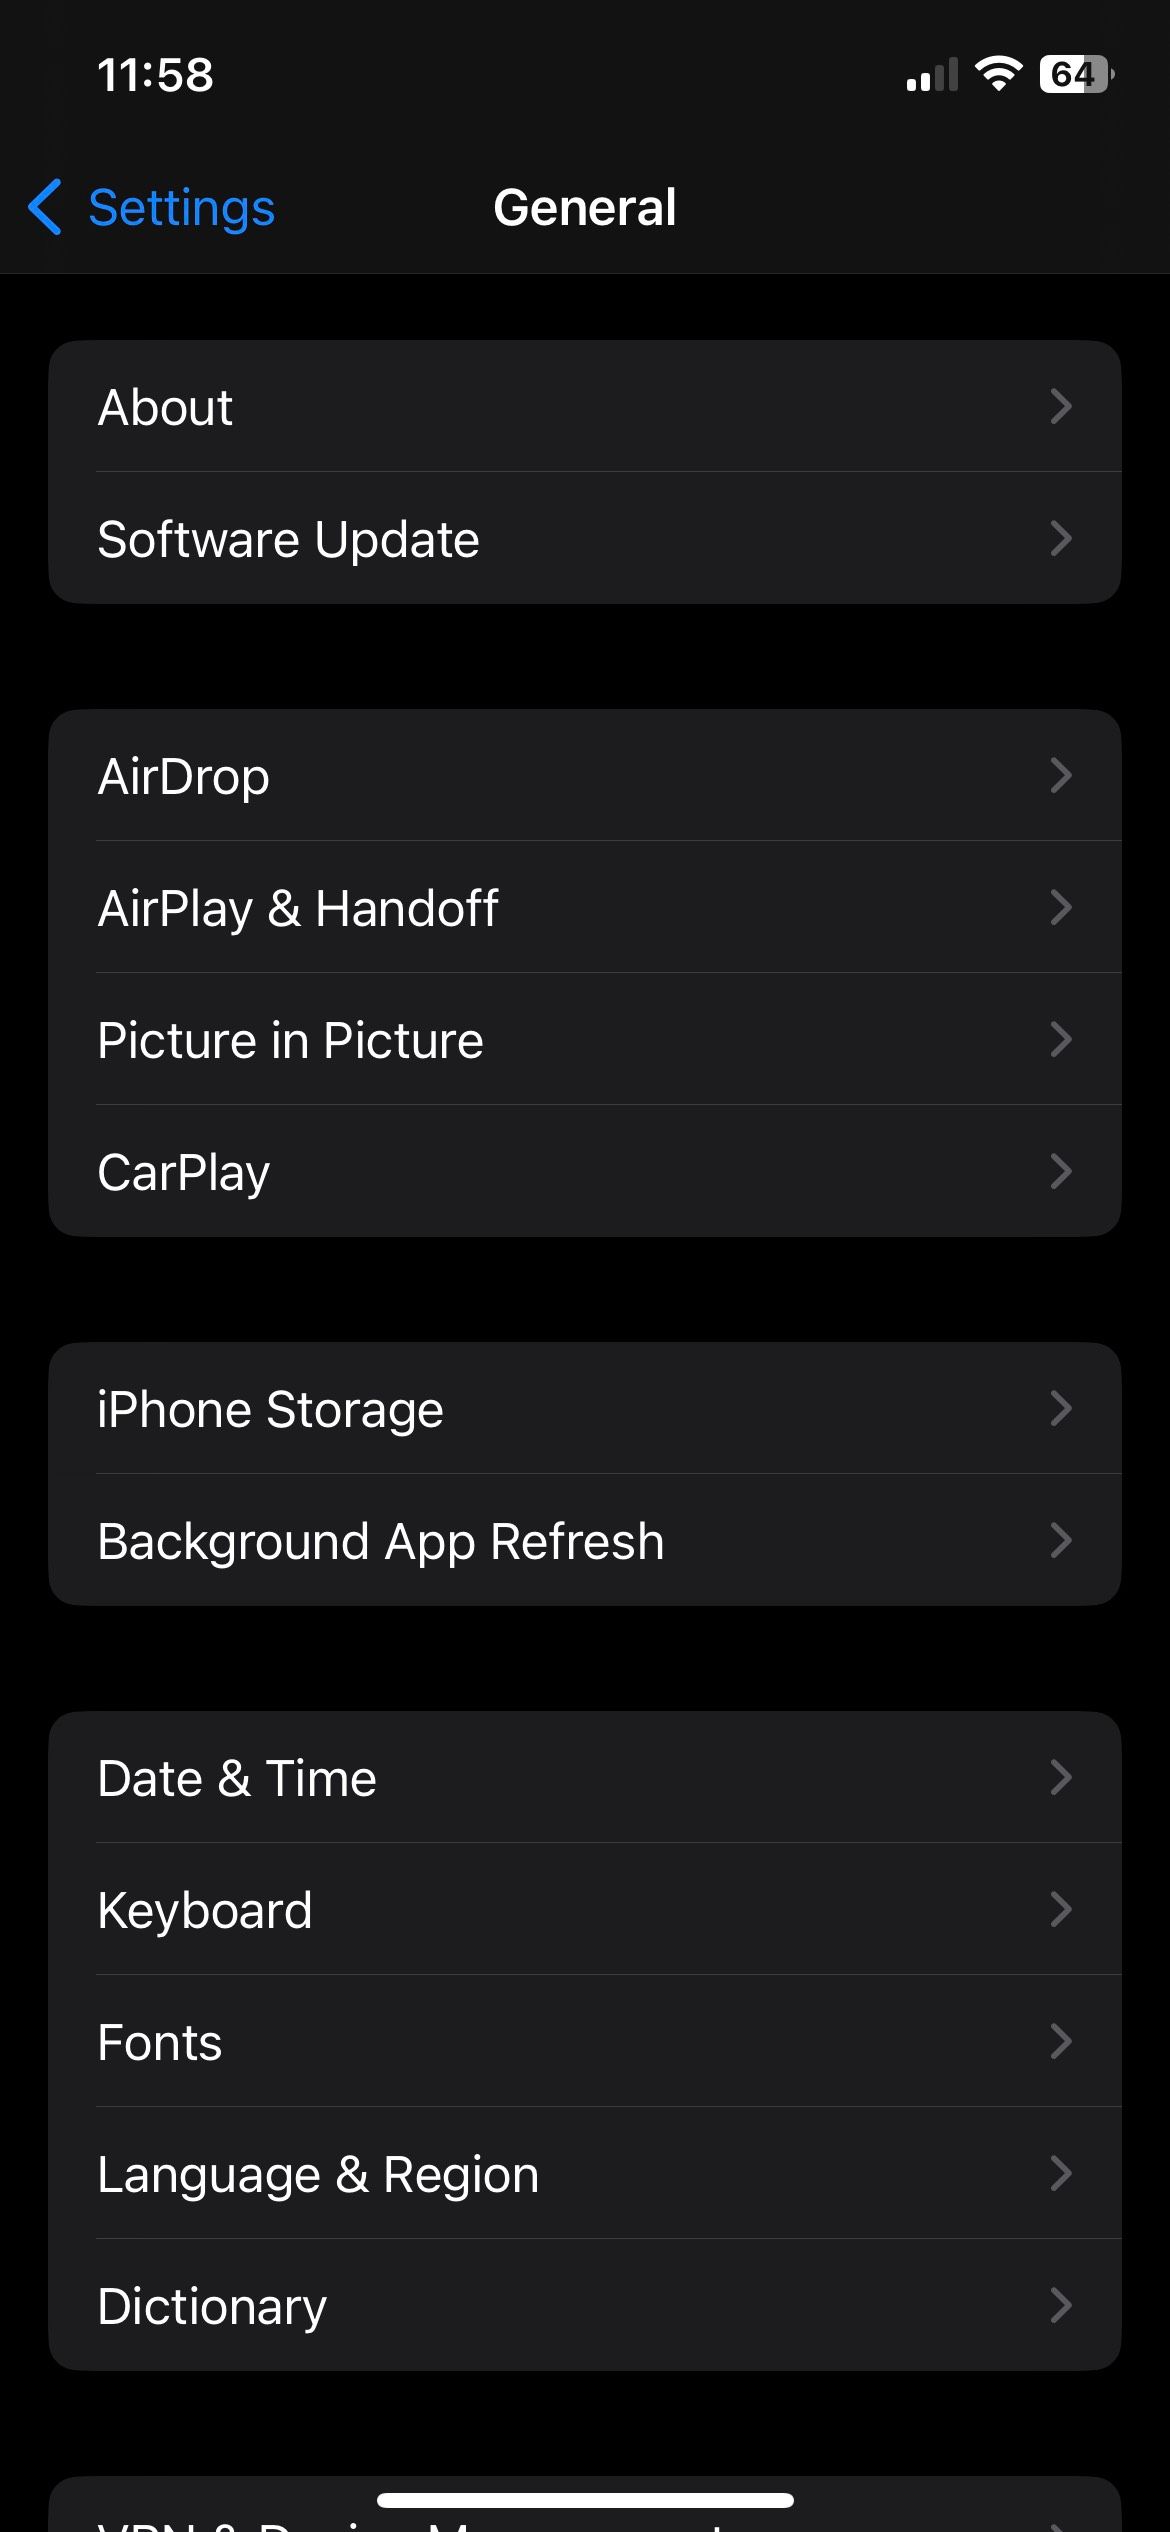 The Date and Time Subsection within Settings on iOS